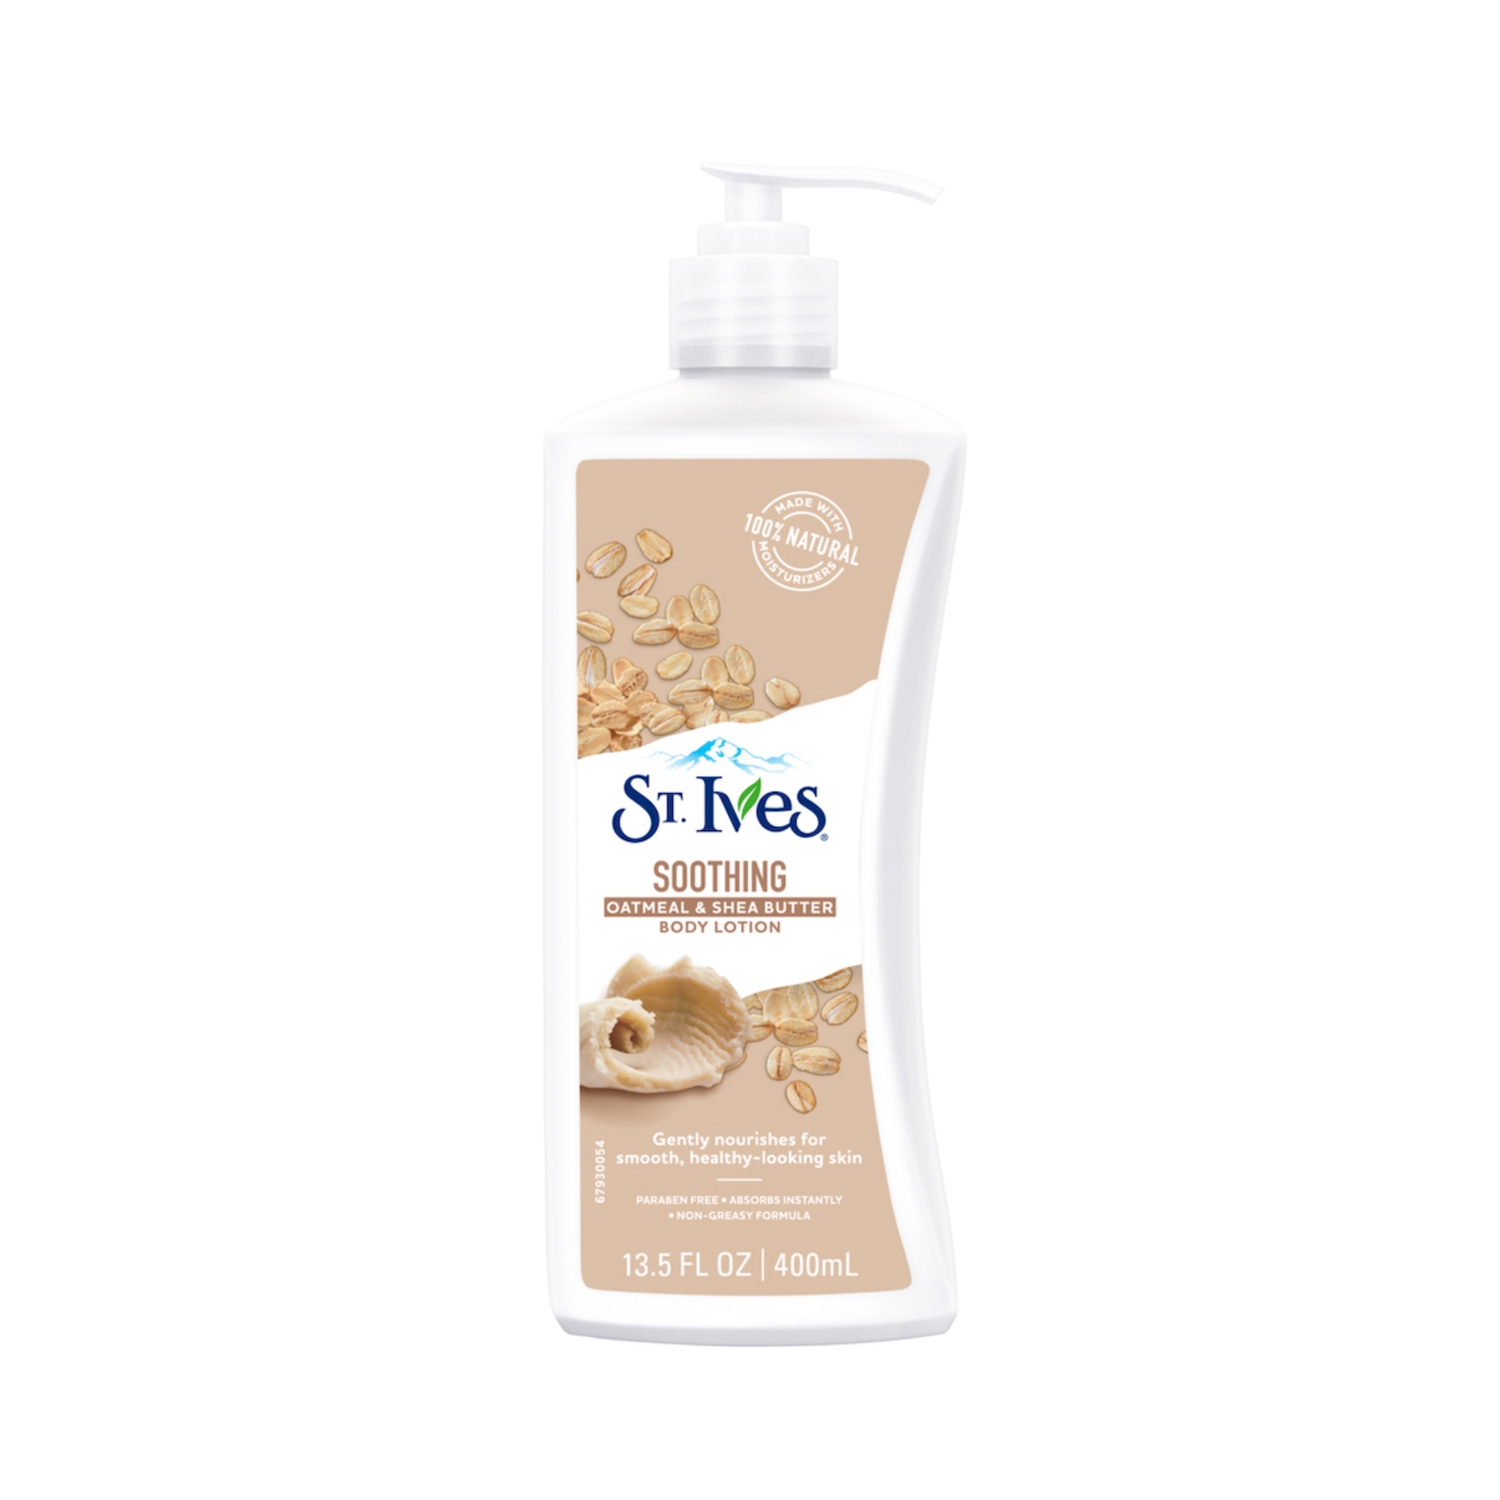 St. Ives | St. Ives Soothing Oatmeal & Shea Butter Body Lotion (400ml)